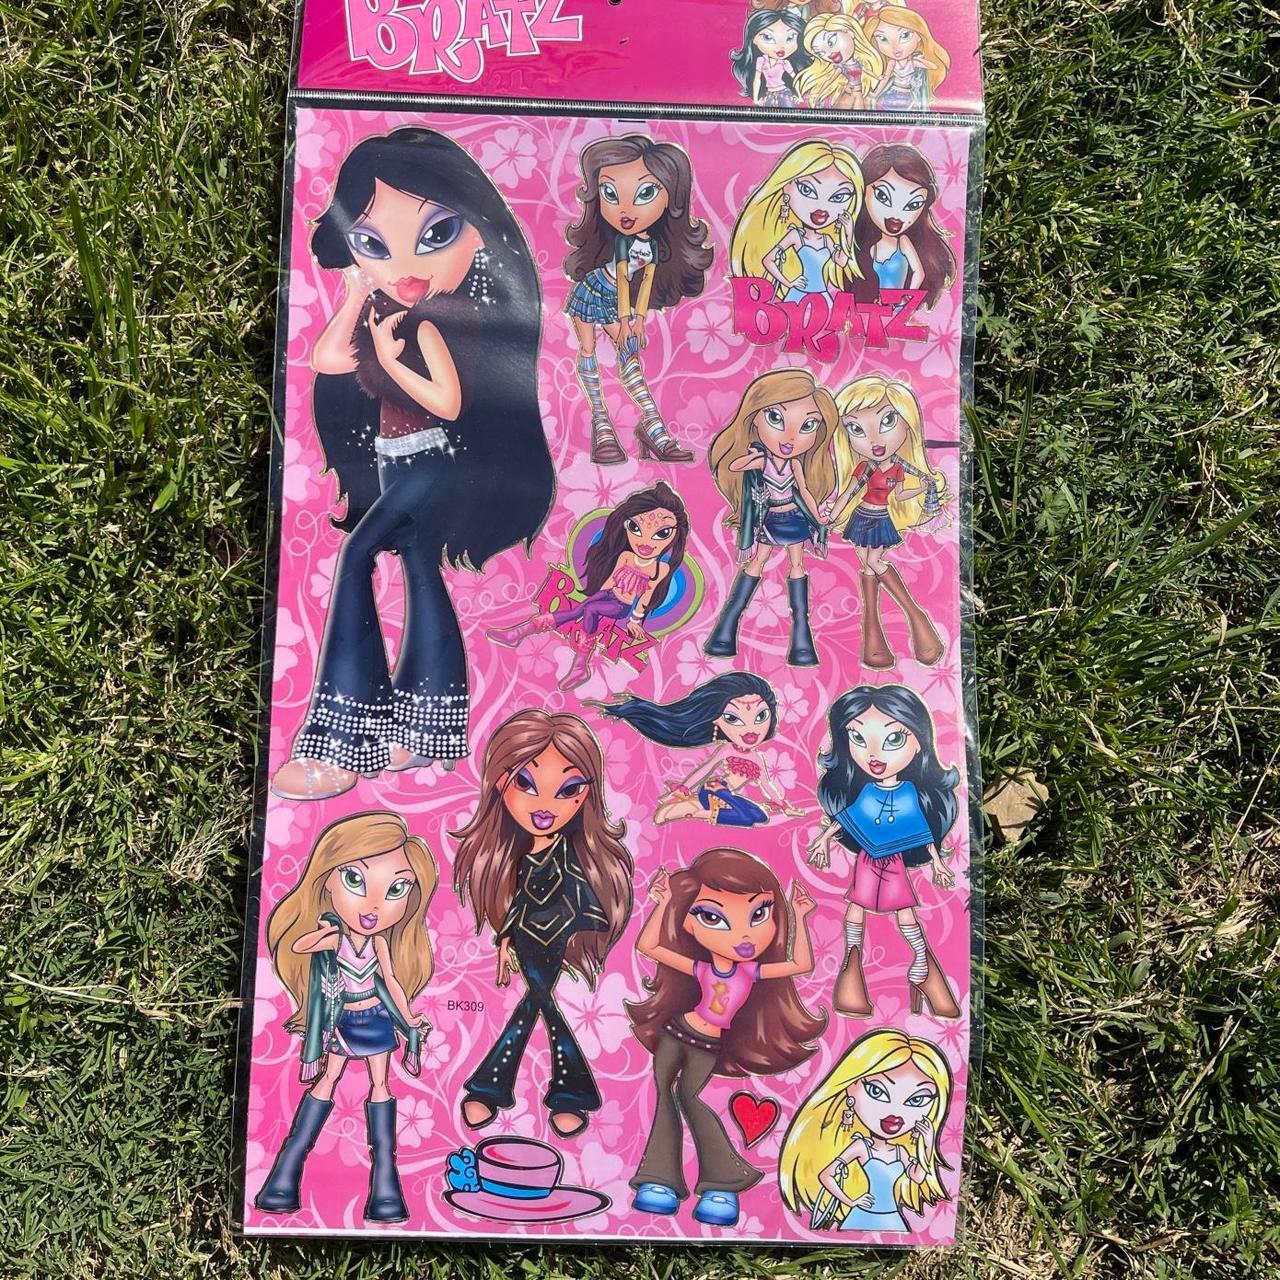 Bratz stickers, 13 stickers total, I have multiple